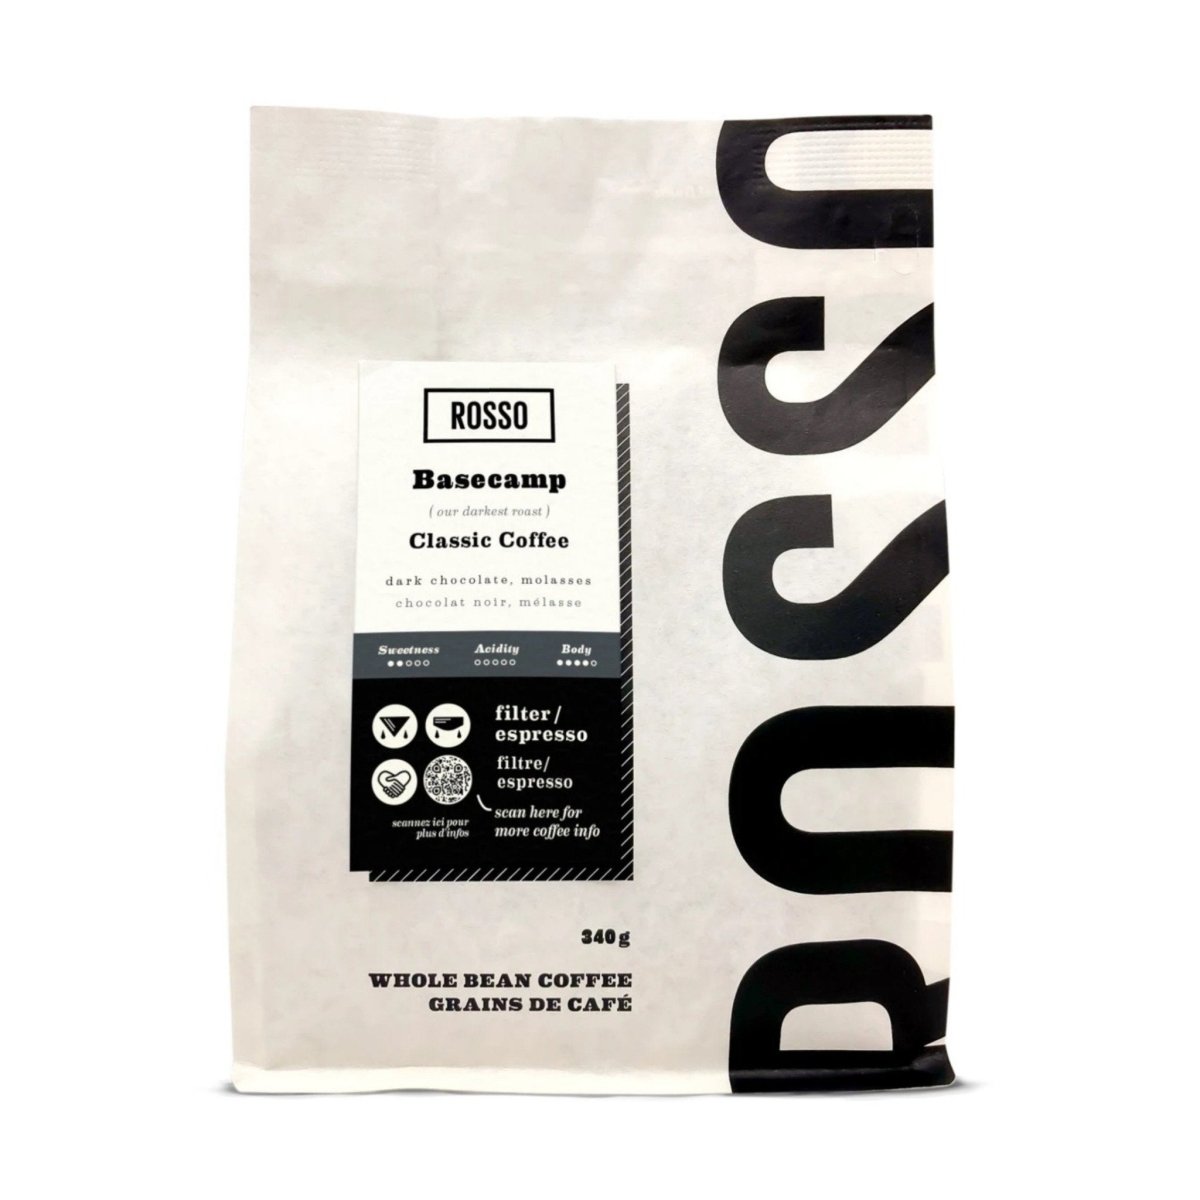 GotoPopupYYC - Rosso Coffee Roasters - Basecamp - Blend - 5lbs -ROSSO-5-0004